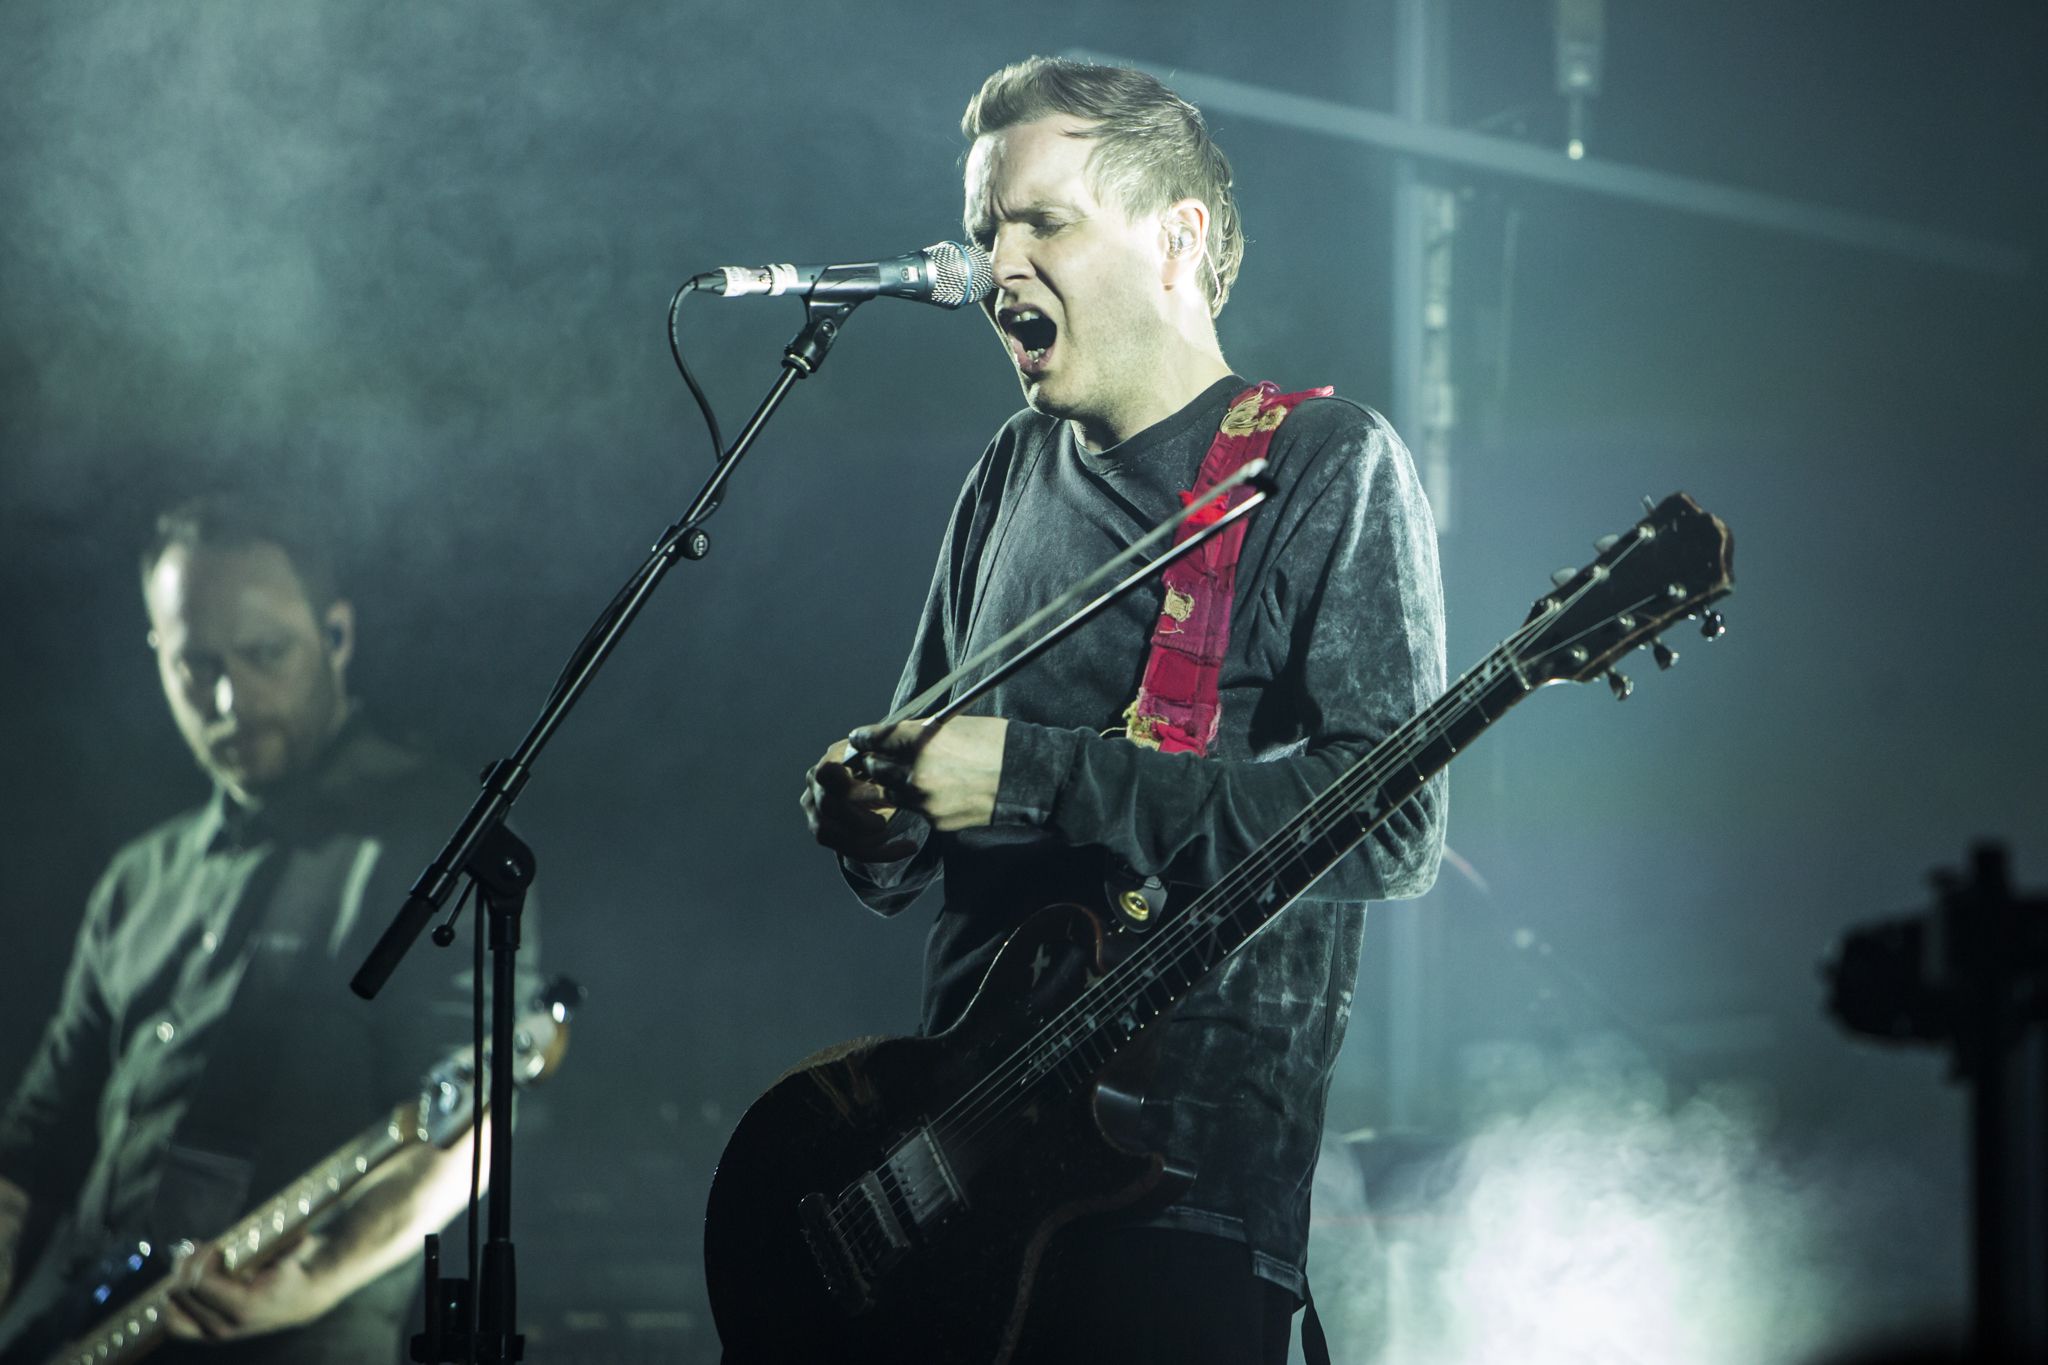 sigur ros 4 Live Review: Sigur Rós at the Fox Theater in Pomona (4/10)